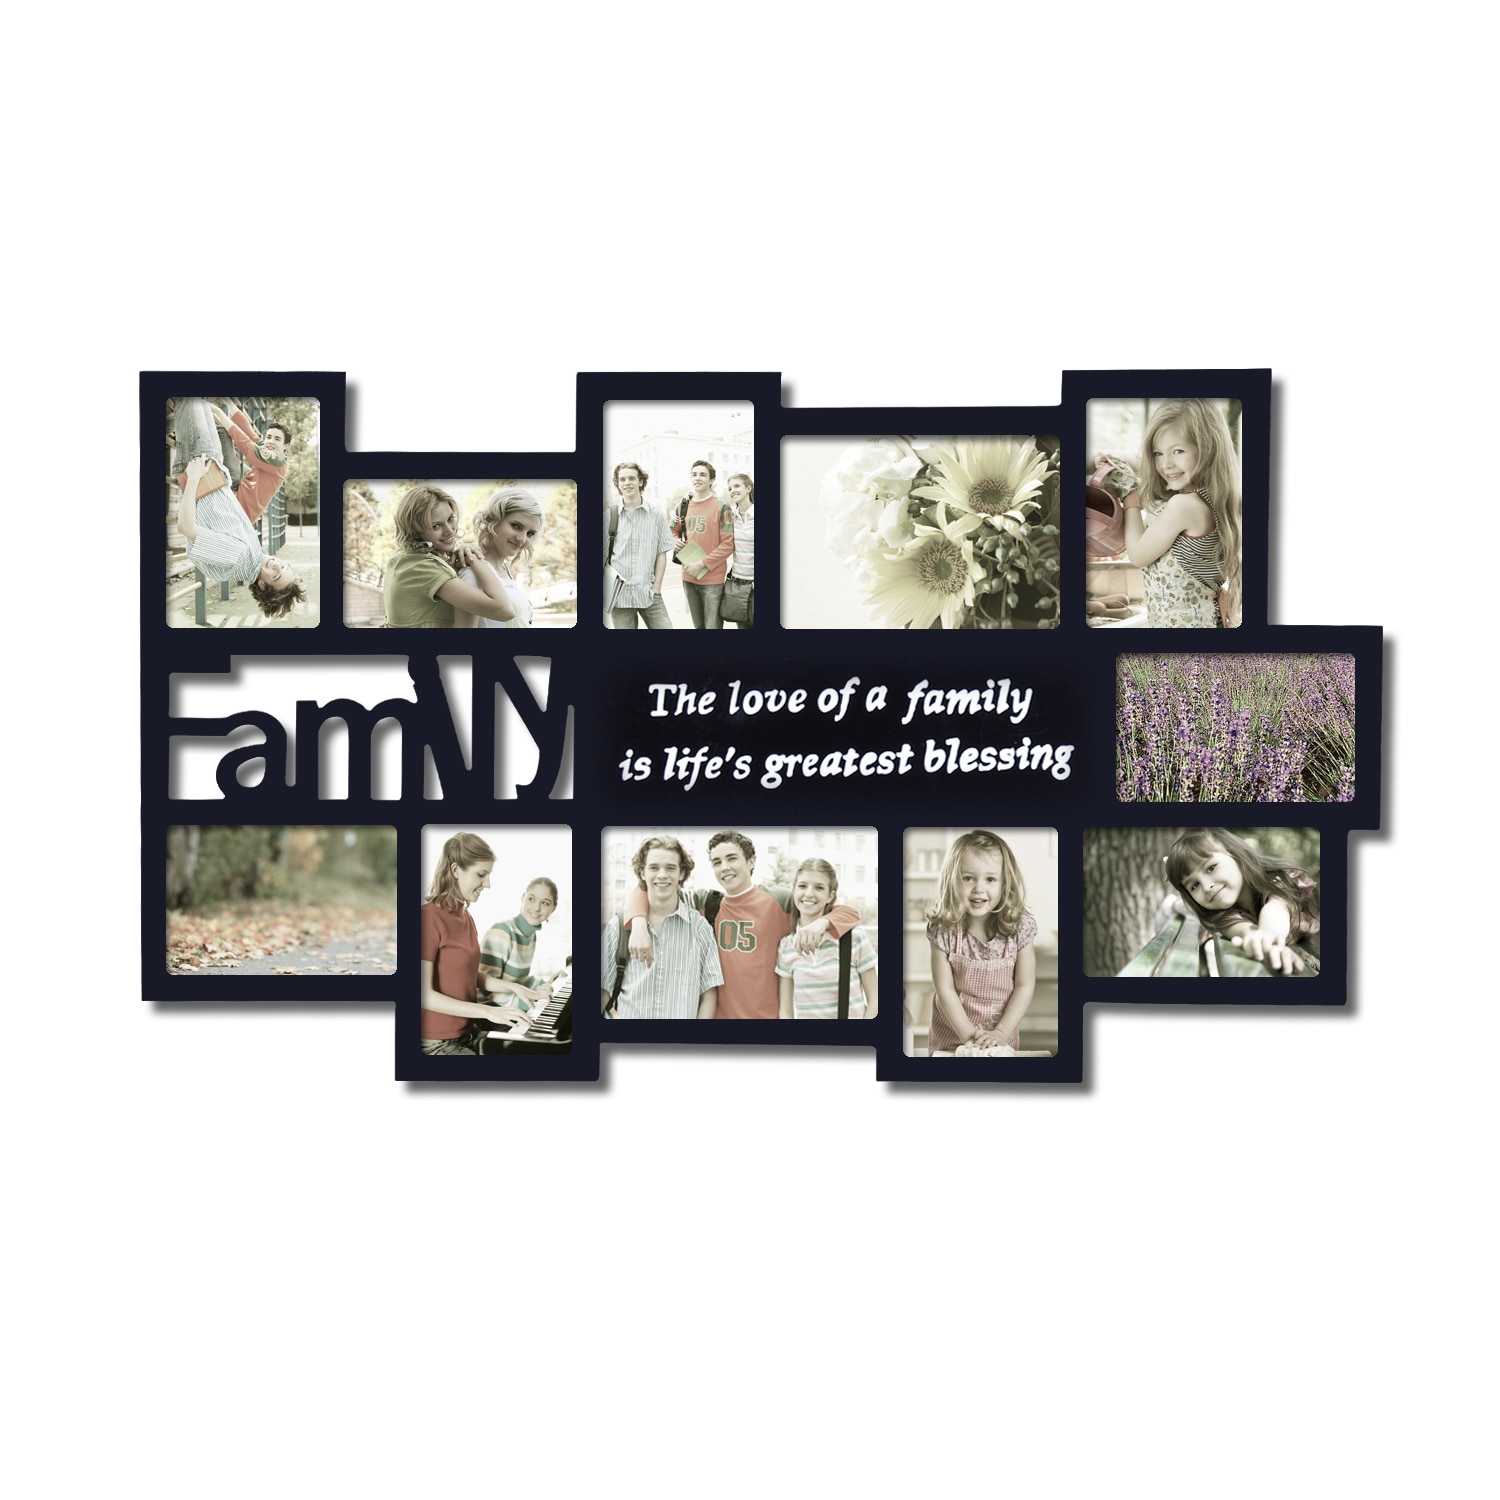 6 pcs - 5x7 inch, 1 pcs - 8x10 inch Black Set of 7,Wall Hanging Moms'creations Collage Photo Frames